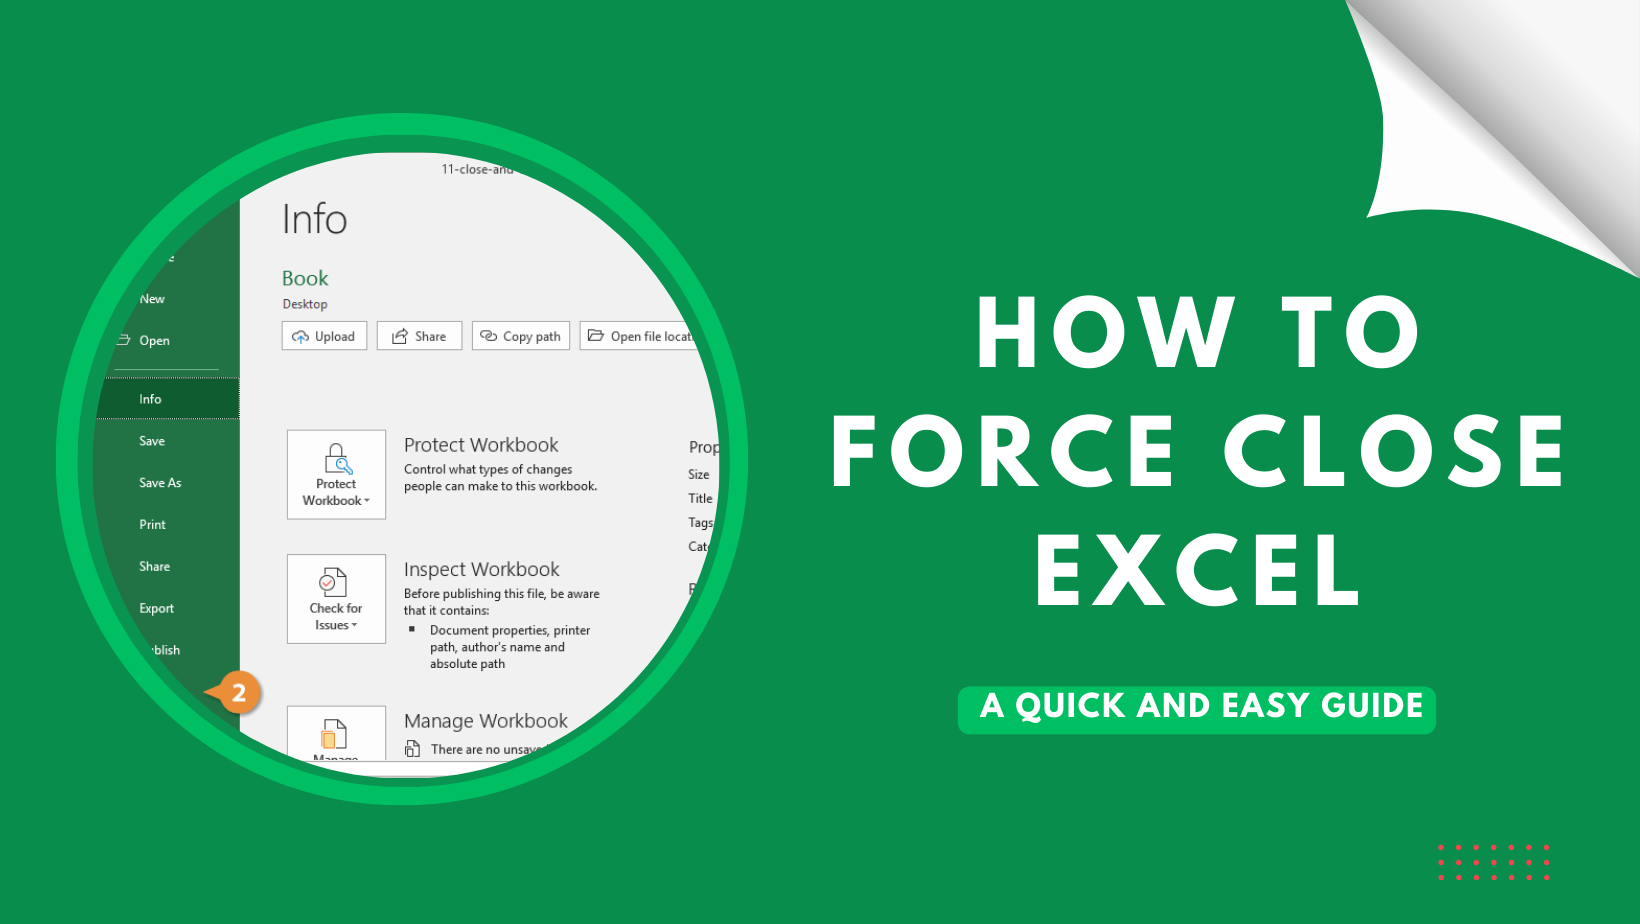 Step 3: If you find any Excel-related processes, select them and click on the End Task button.
Step 4: Close any other programs that may be interfering with Excel.